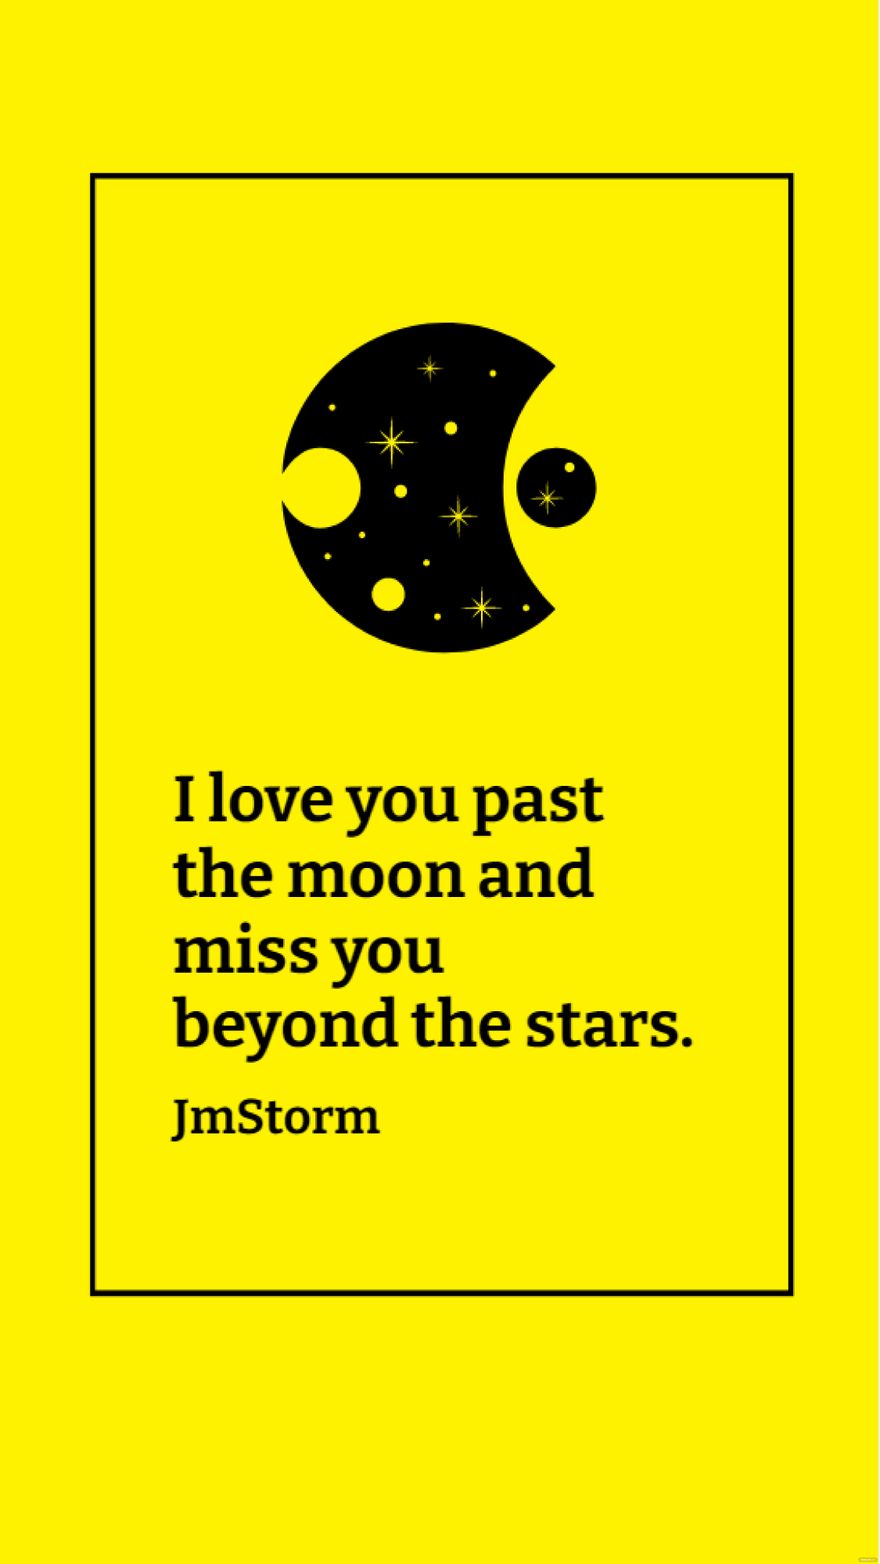 JmStorm - I love you past the moon and miss you beyond the stars. in JPG